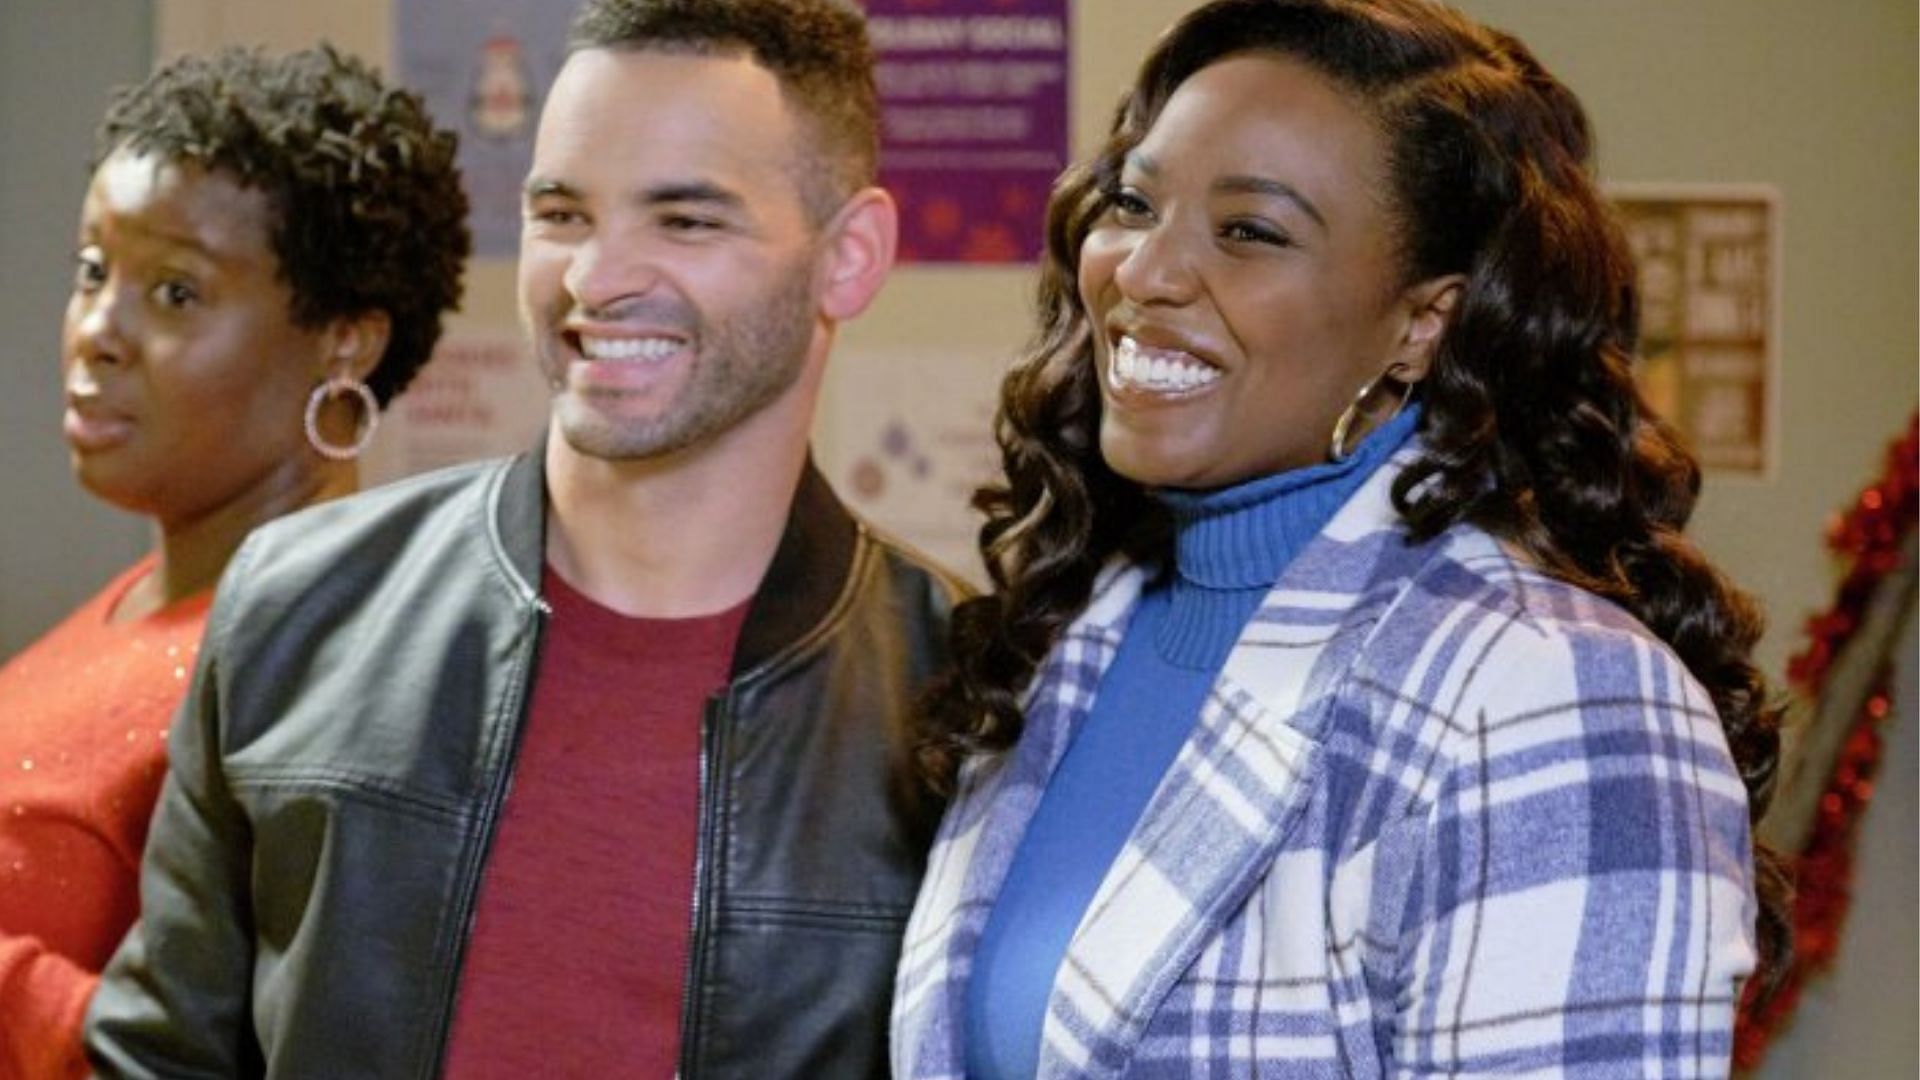 Will Adams and Olivia Washington from &lsquo;A Holiday in Harlem&rsquo; (Image via Hallmark)